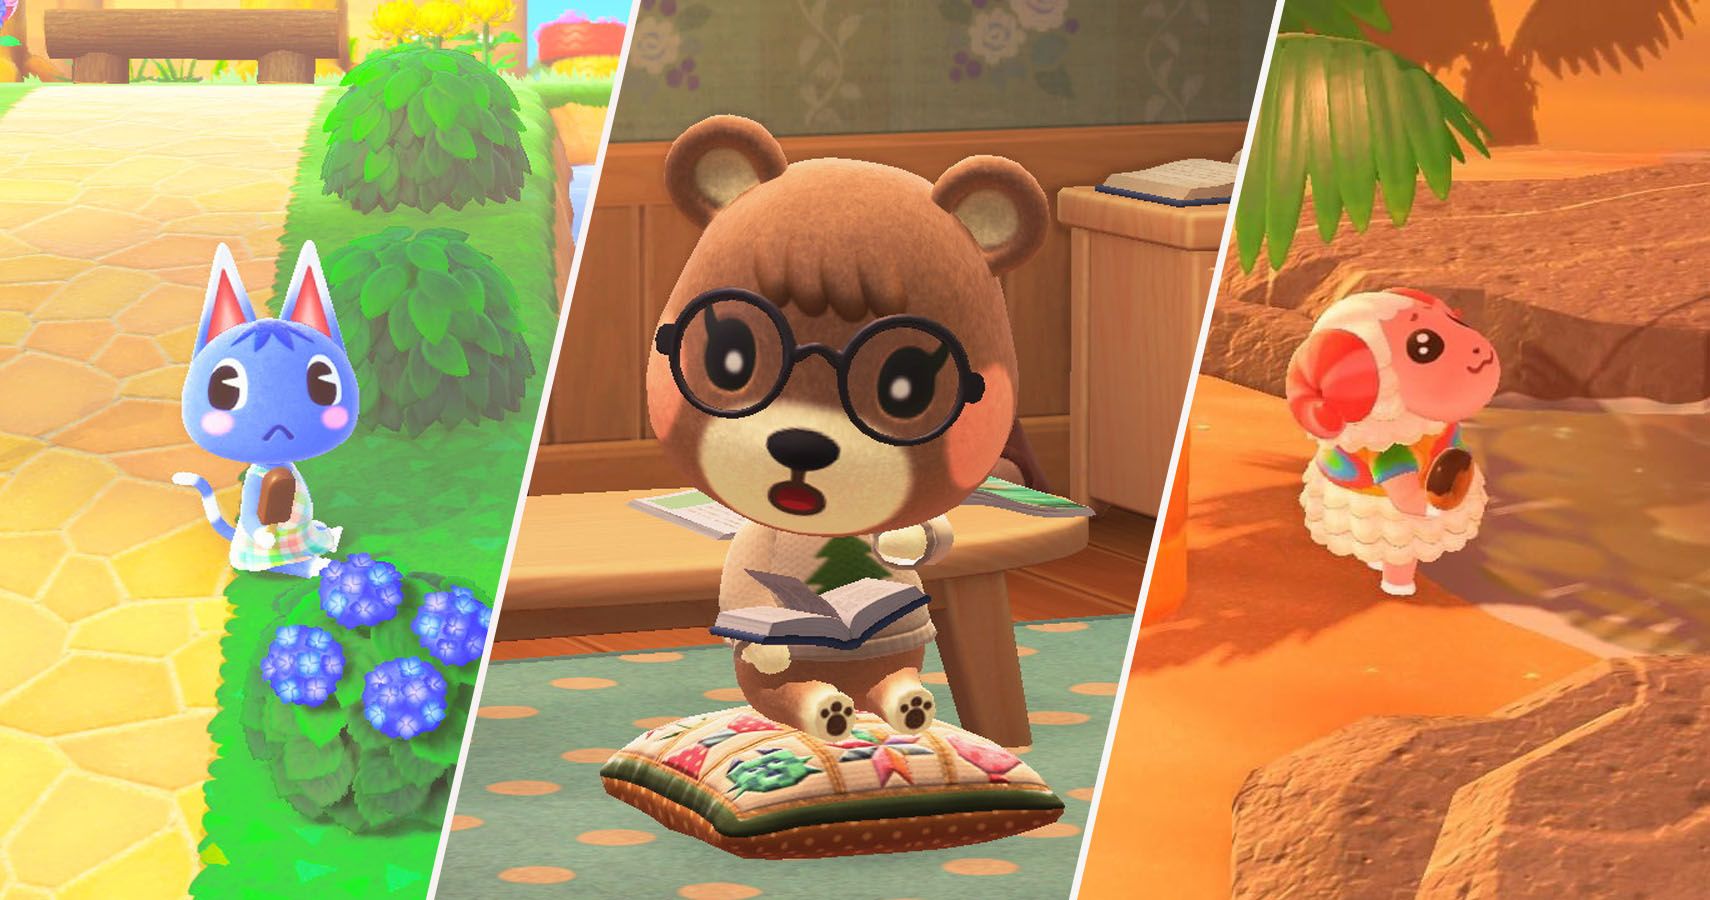 The 15 Cutest Villagers From Animal Crossing Ranked